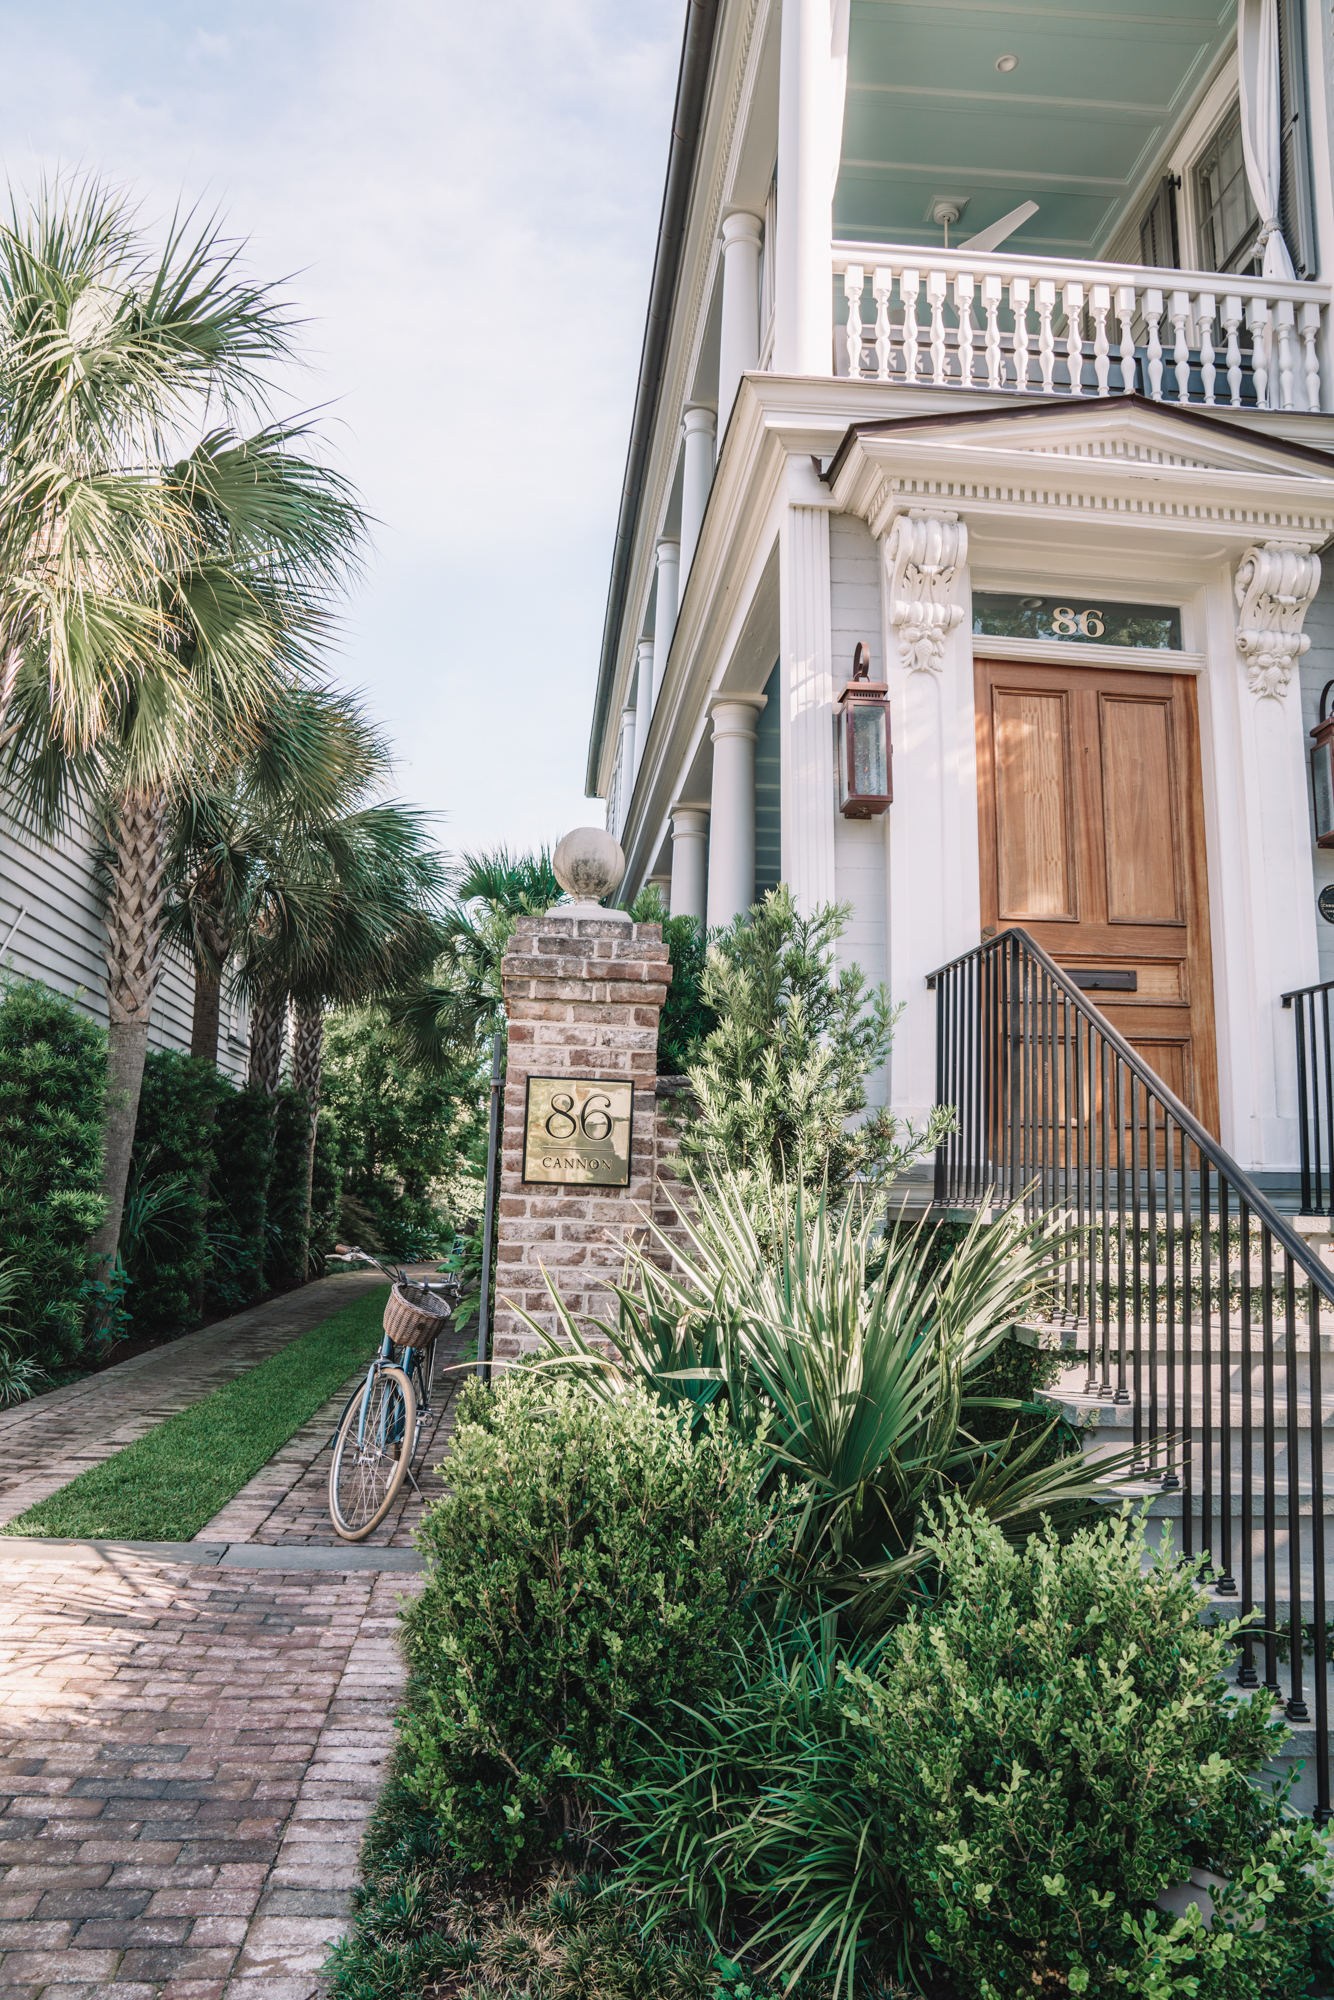 Romantic Things To Do in Charleston, SC - 86 Cannon Inn